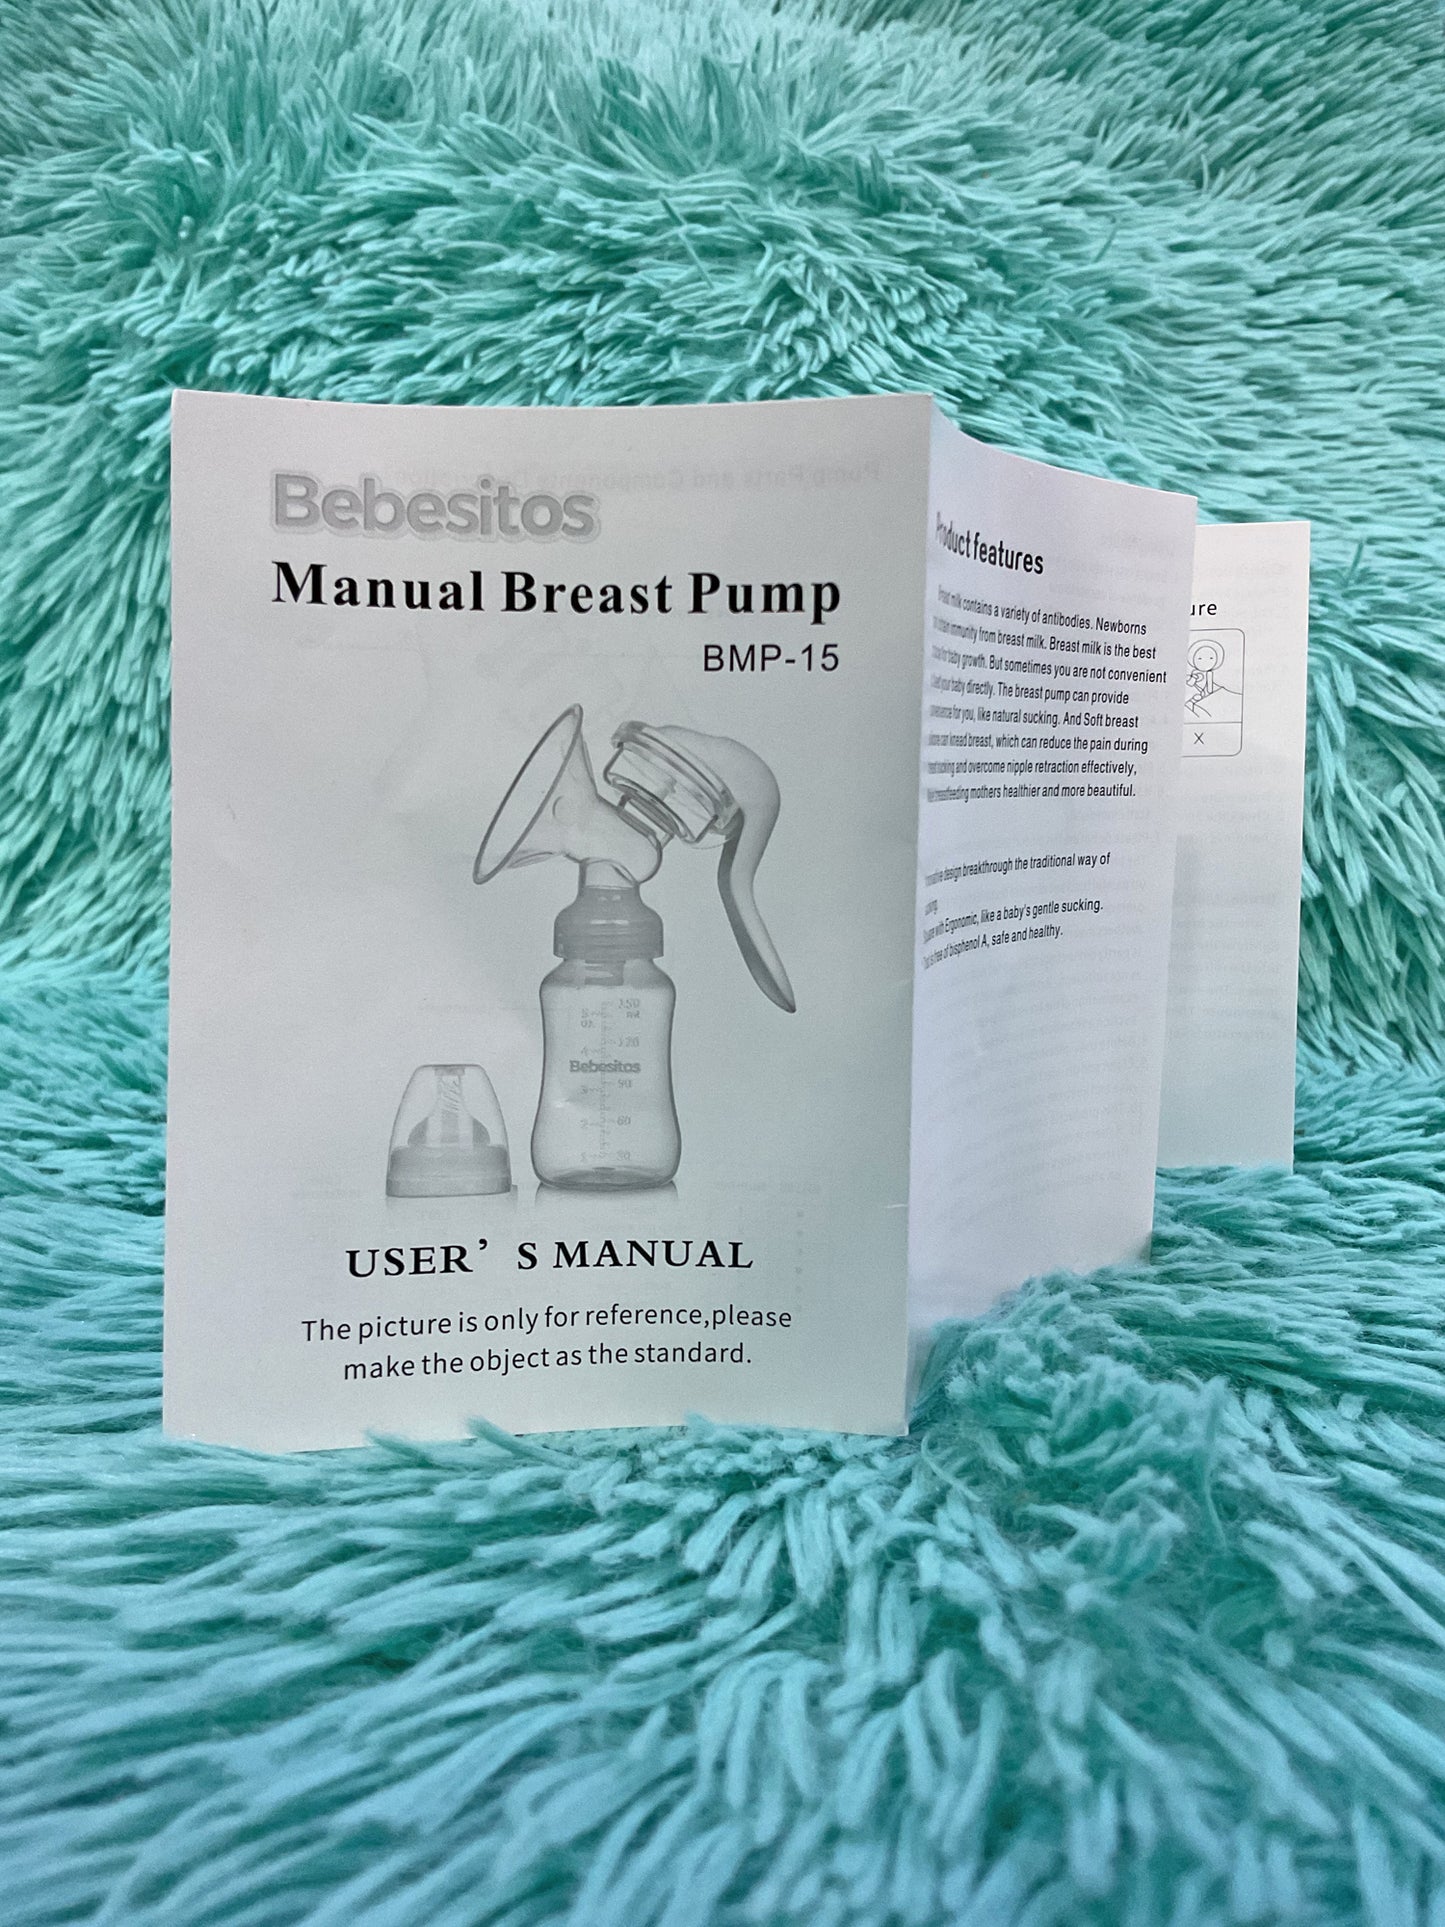 Extractor manual - BMP15